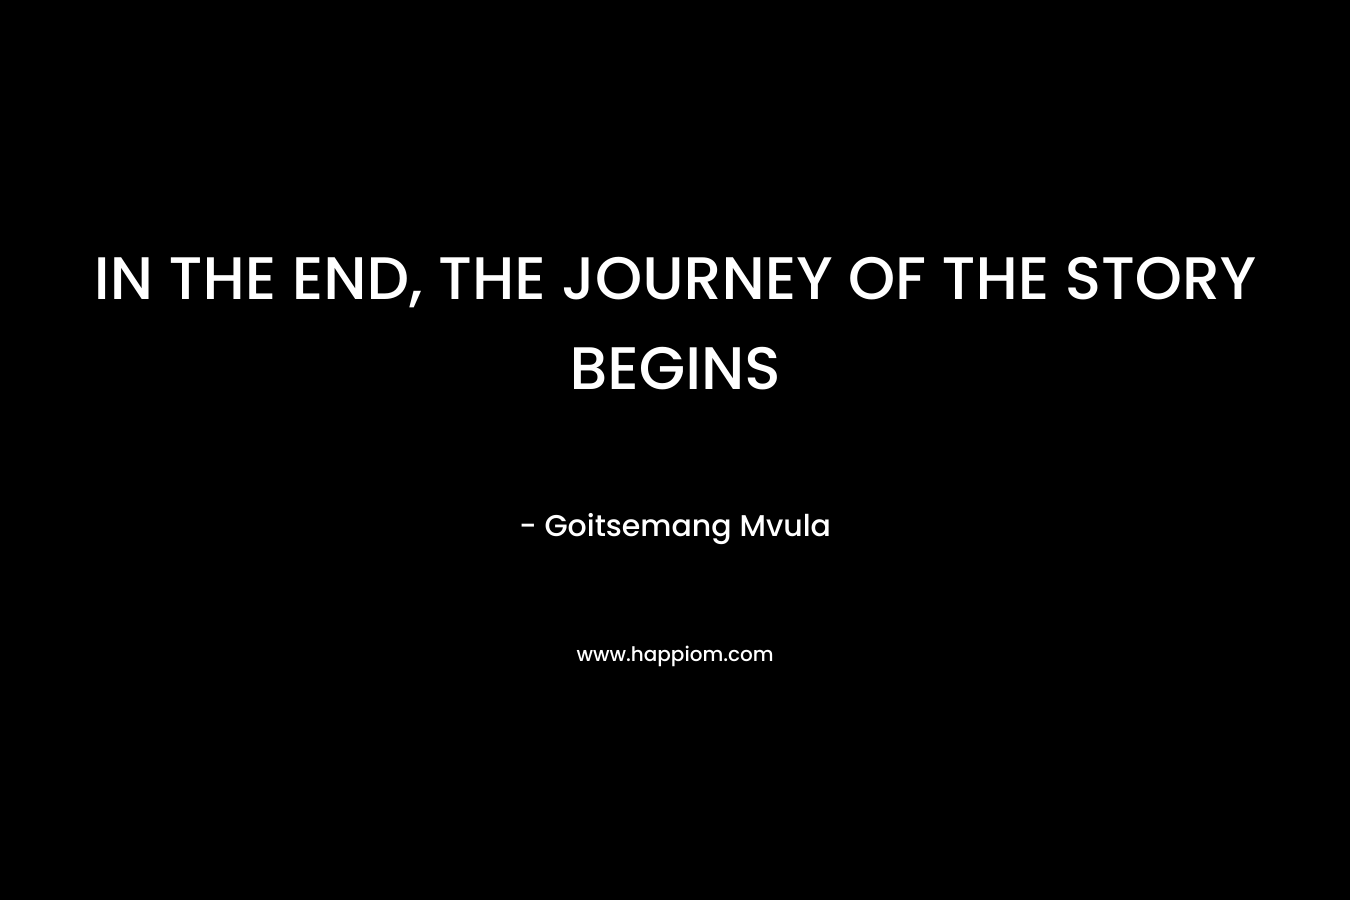 IN THE END, THE JOURNEY OF THE STORY BEGINS